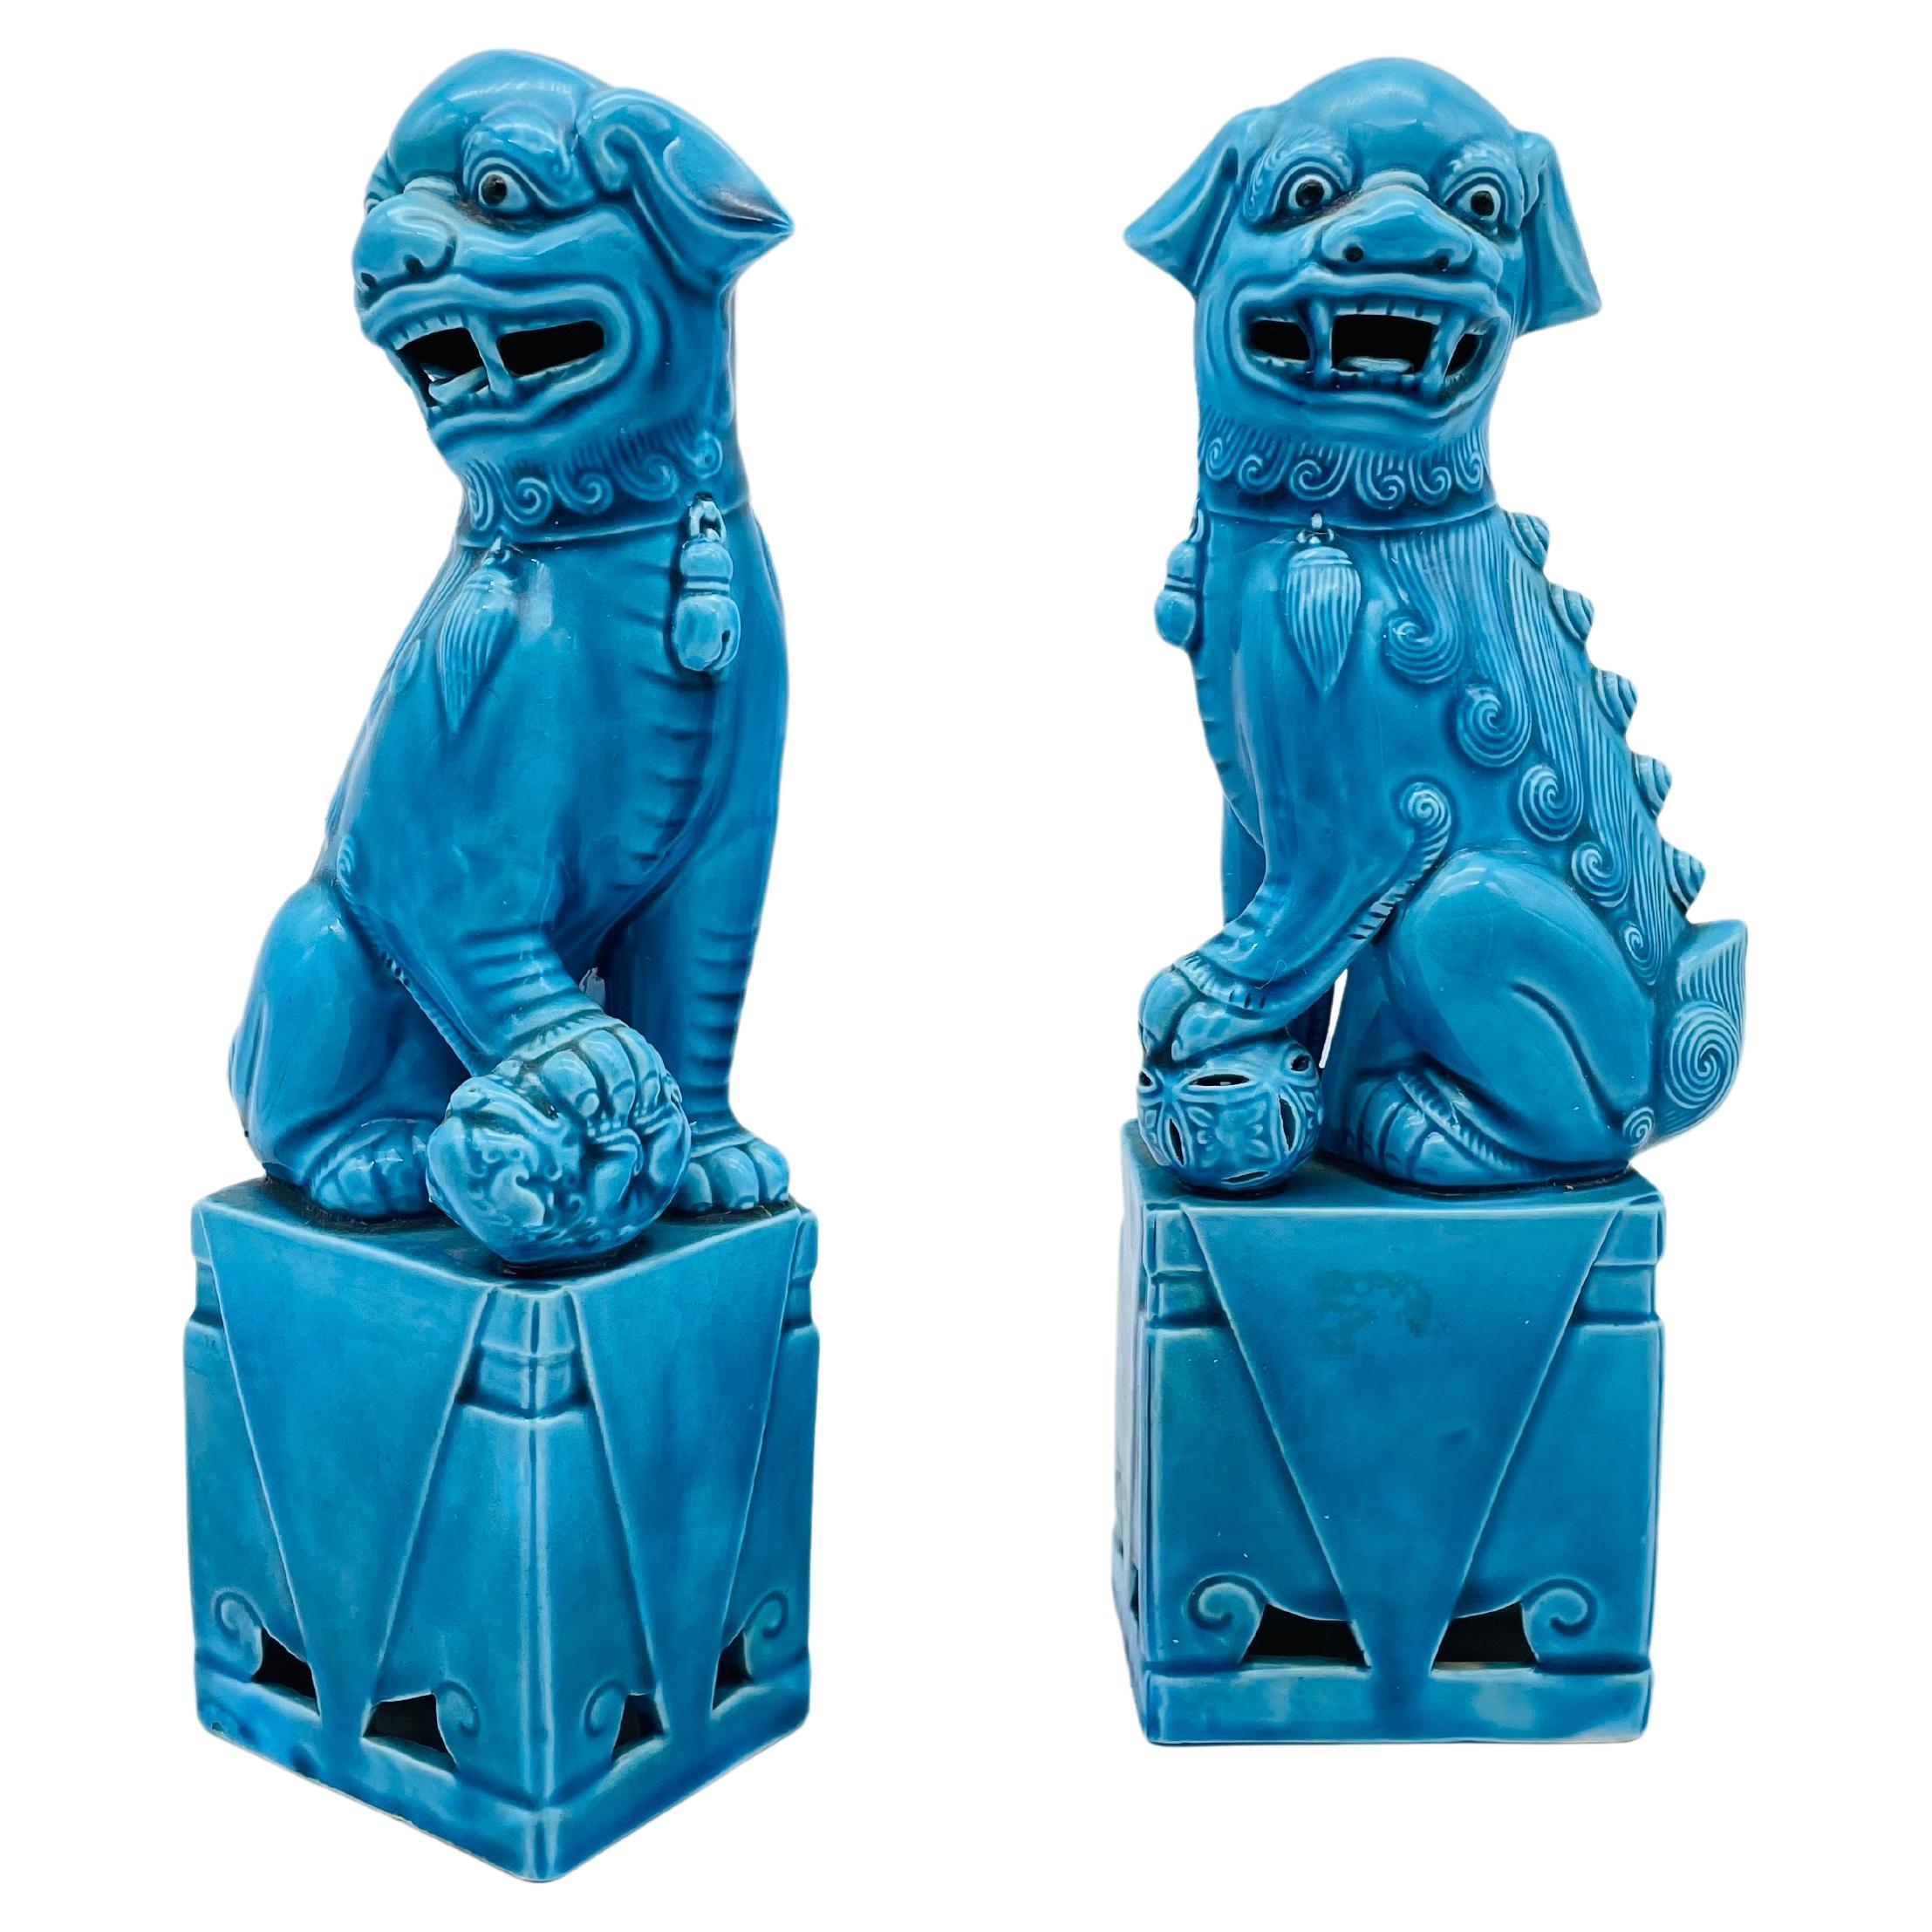 Pair (2) Chinese Fu Dog Sphinx / Incense Holders, 20th Century

Porcelain fully painted in blue. China, 20th century


